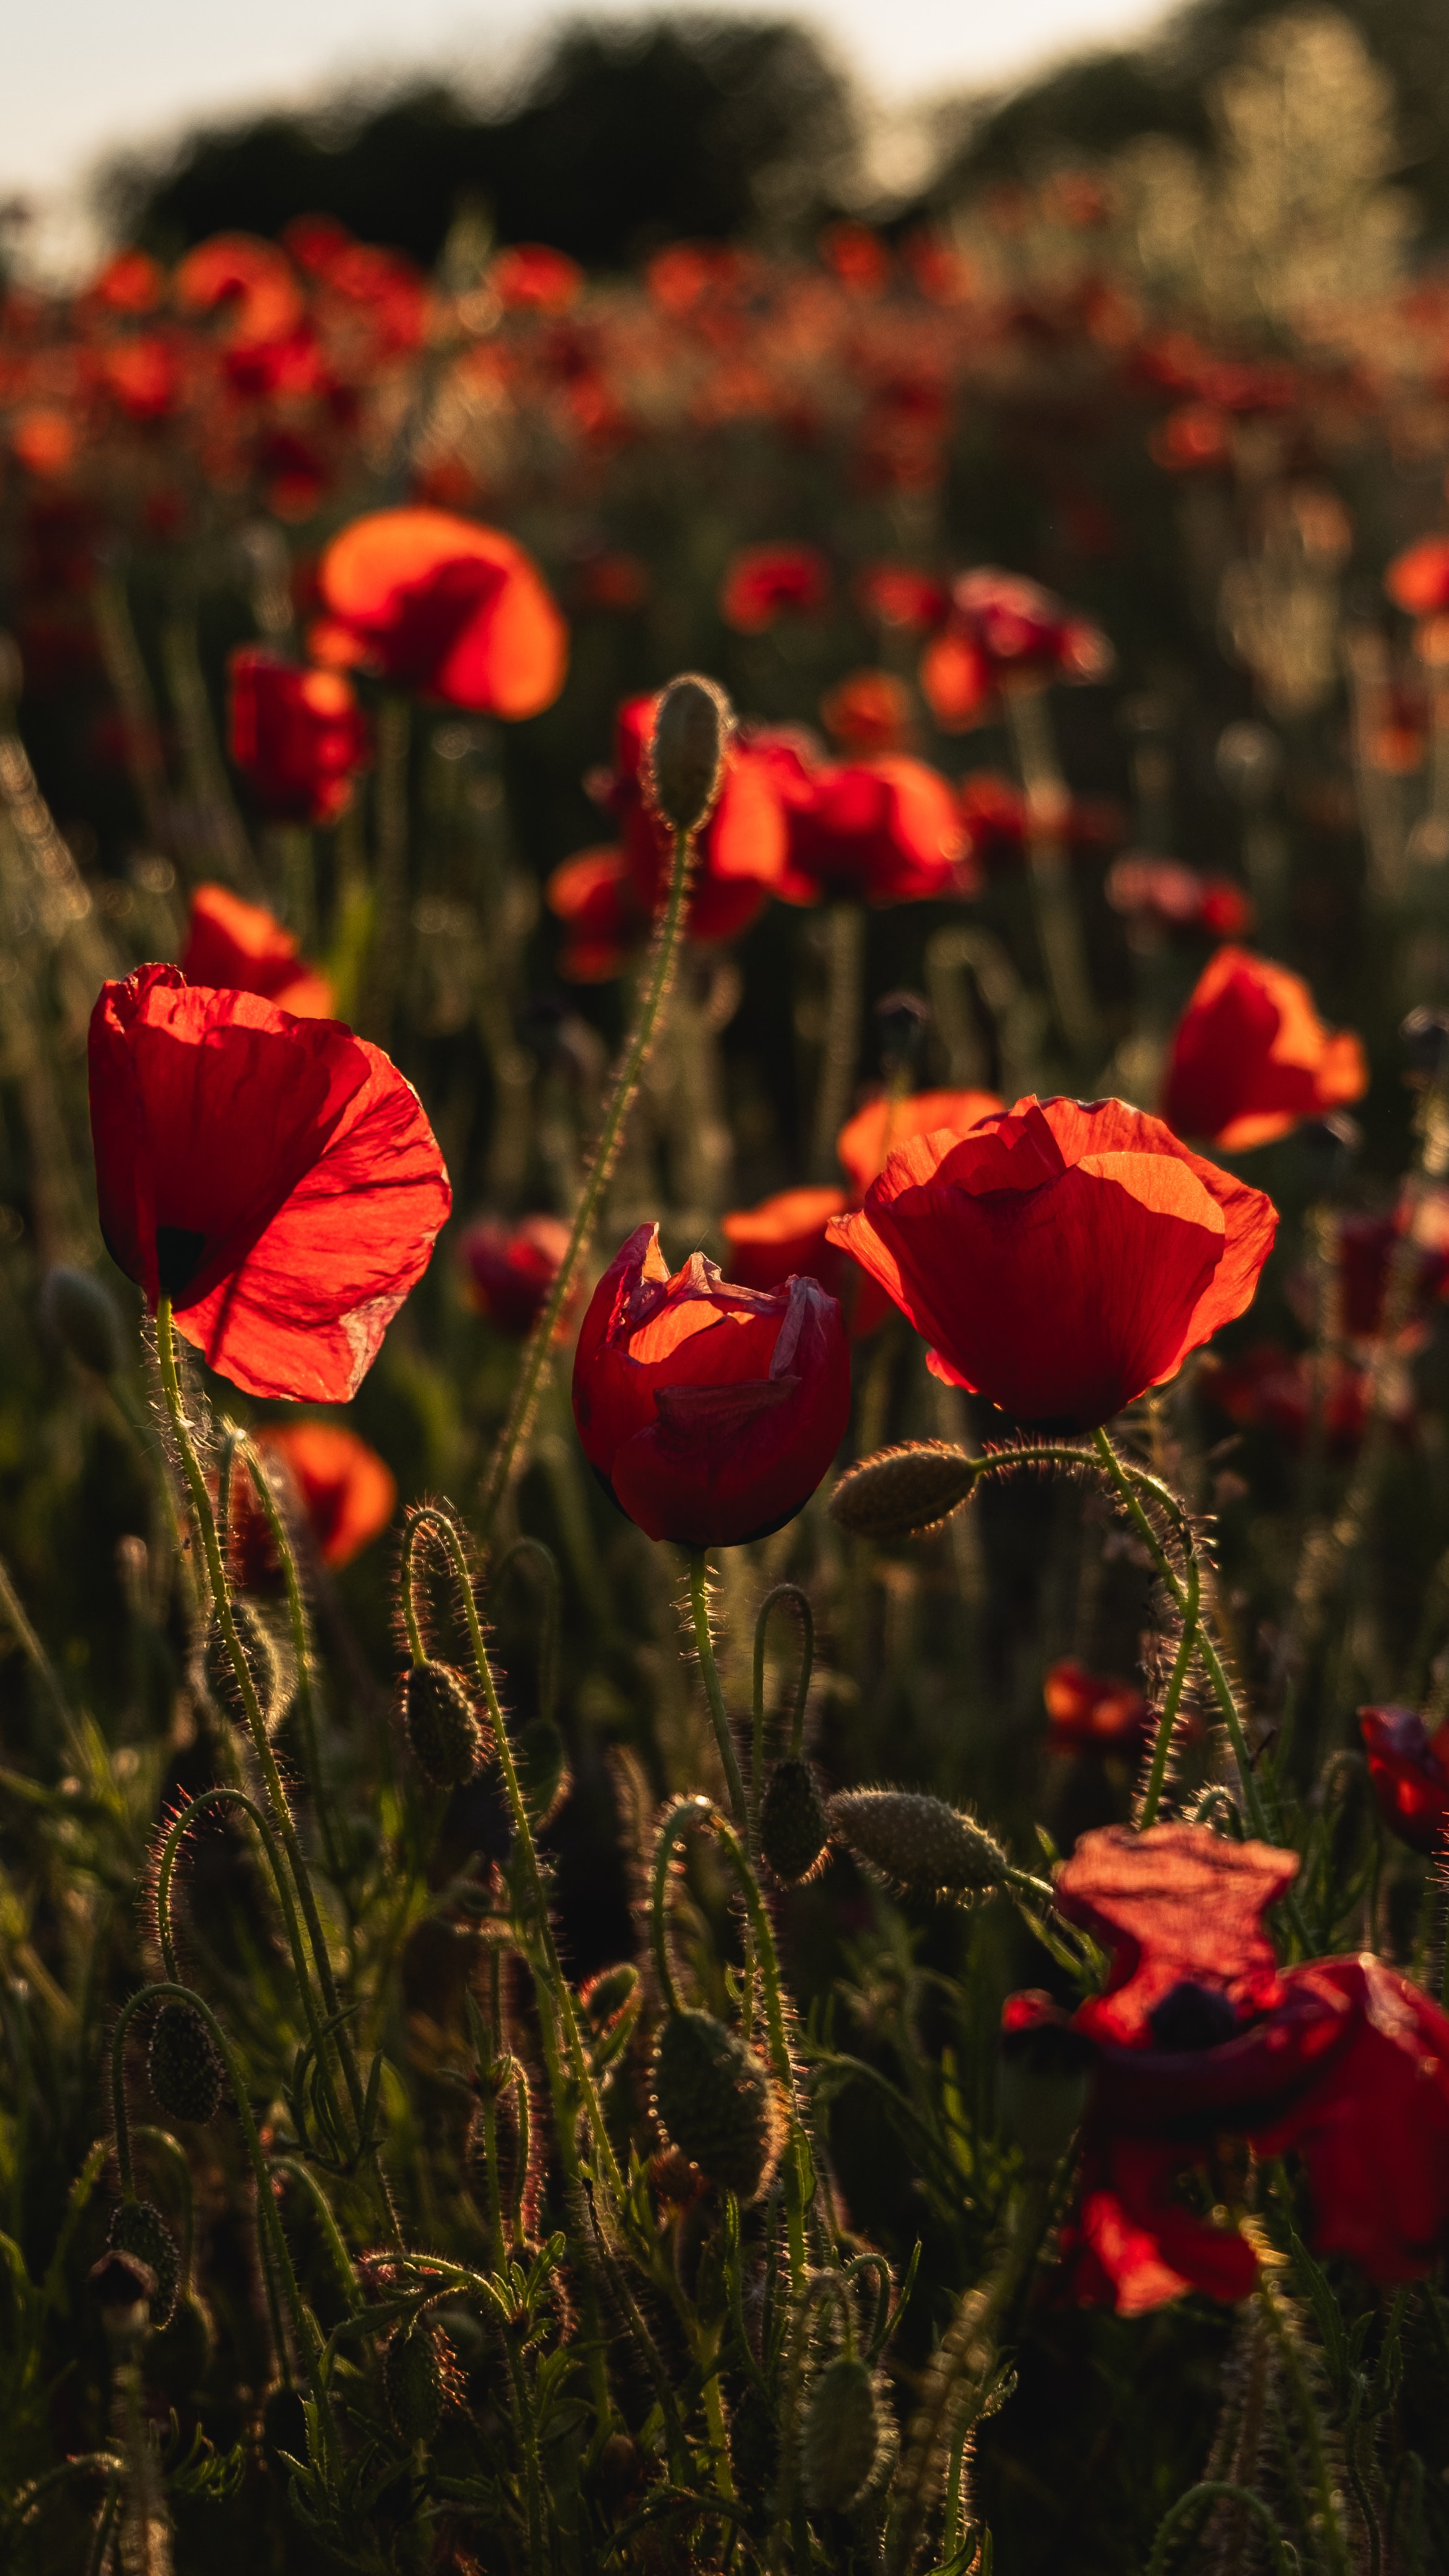 poppy, wildflowers, flowers, red High Definition image